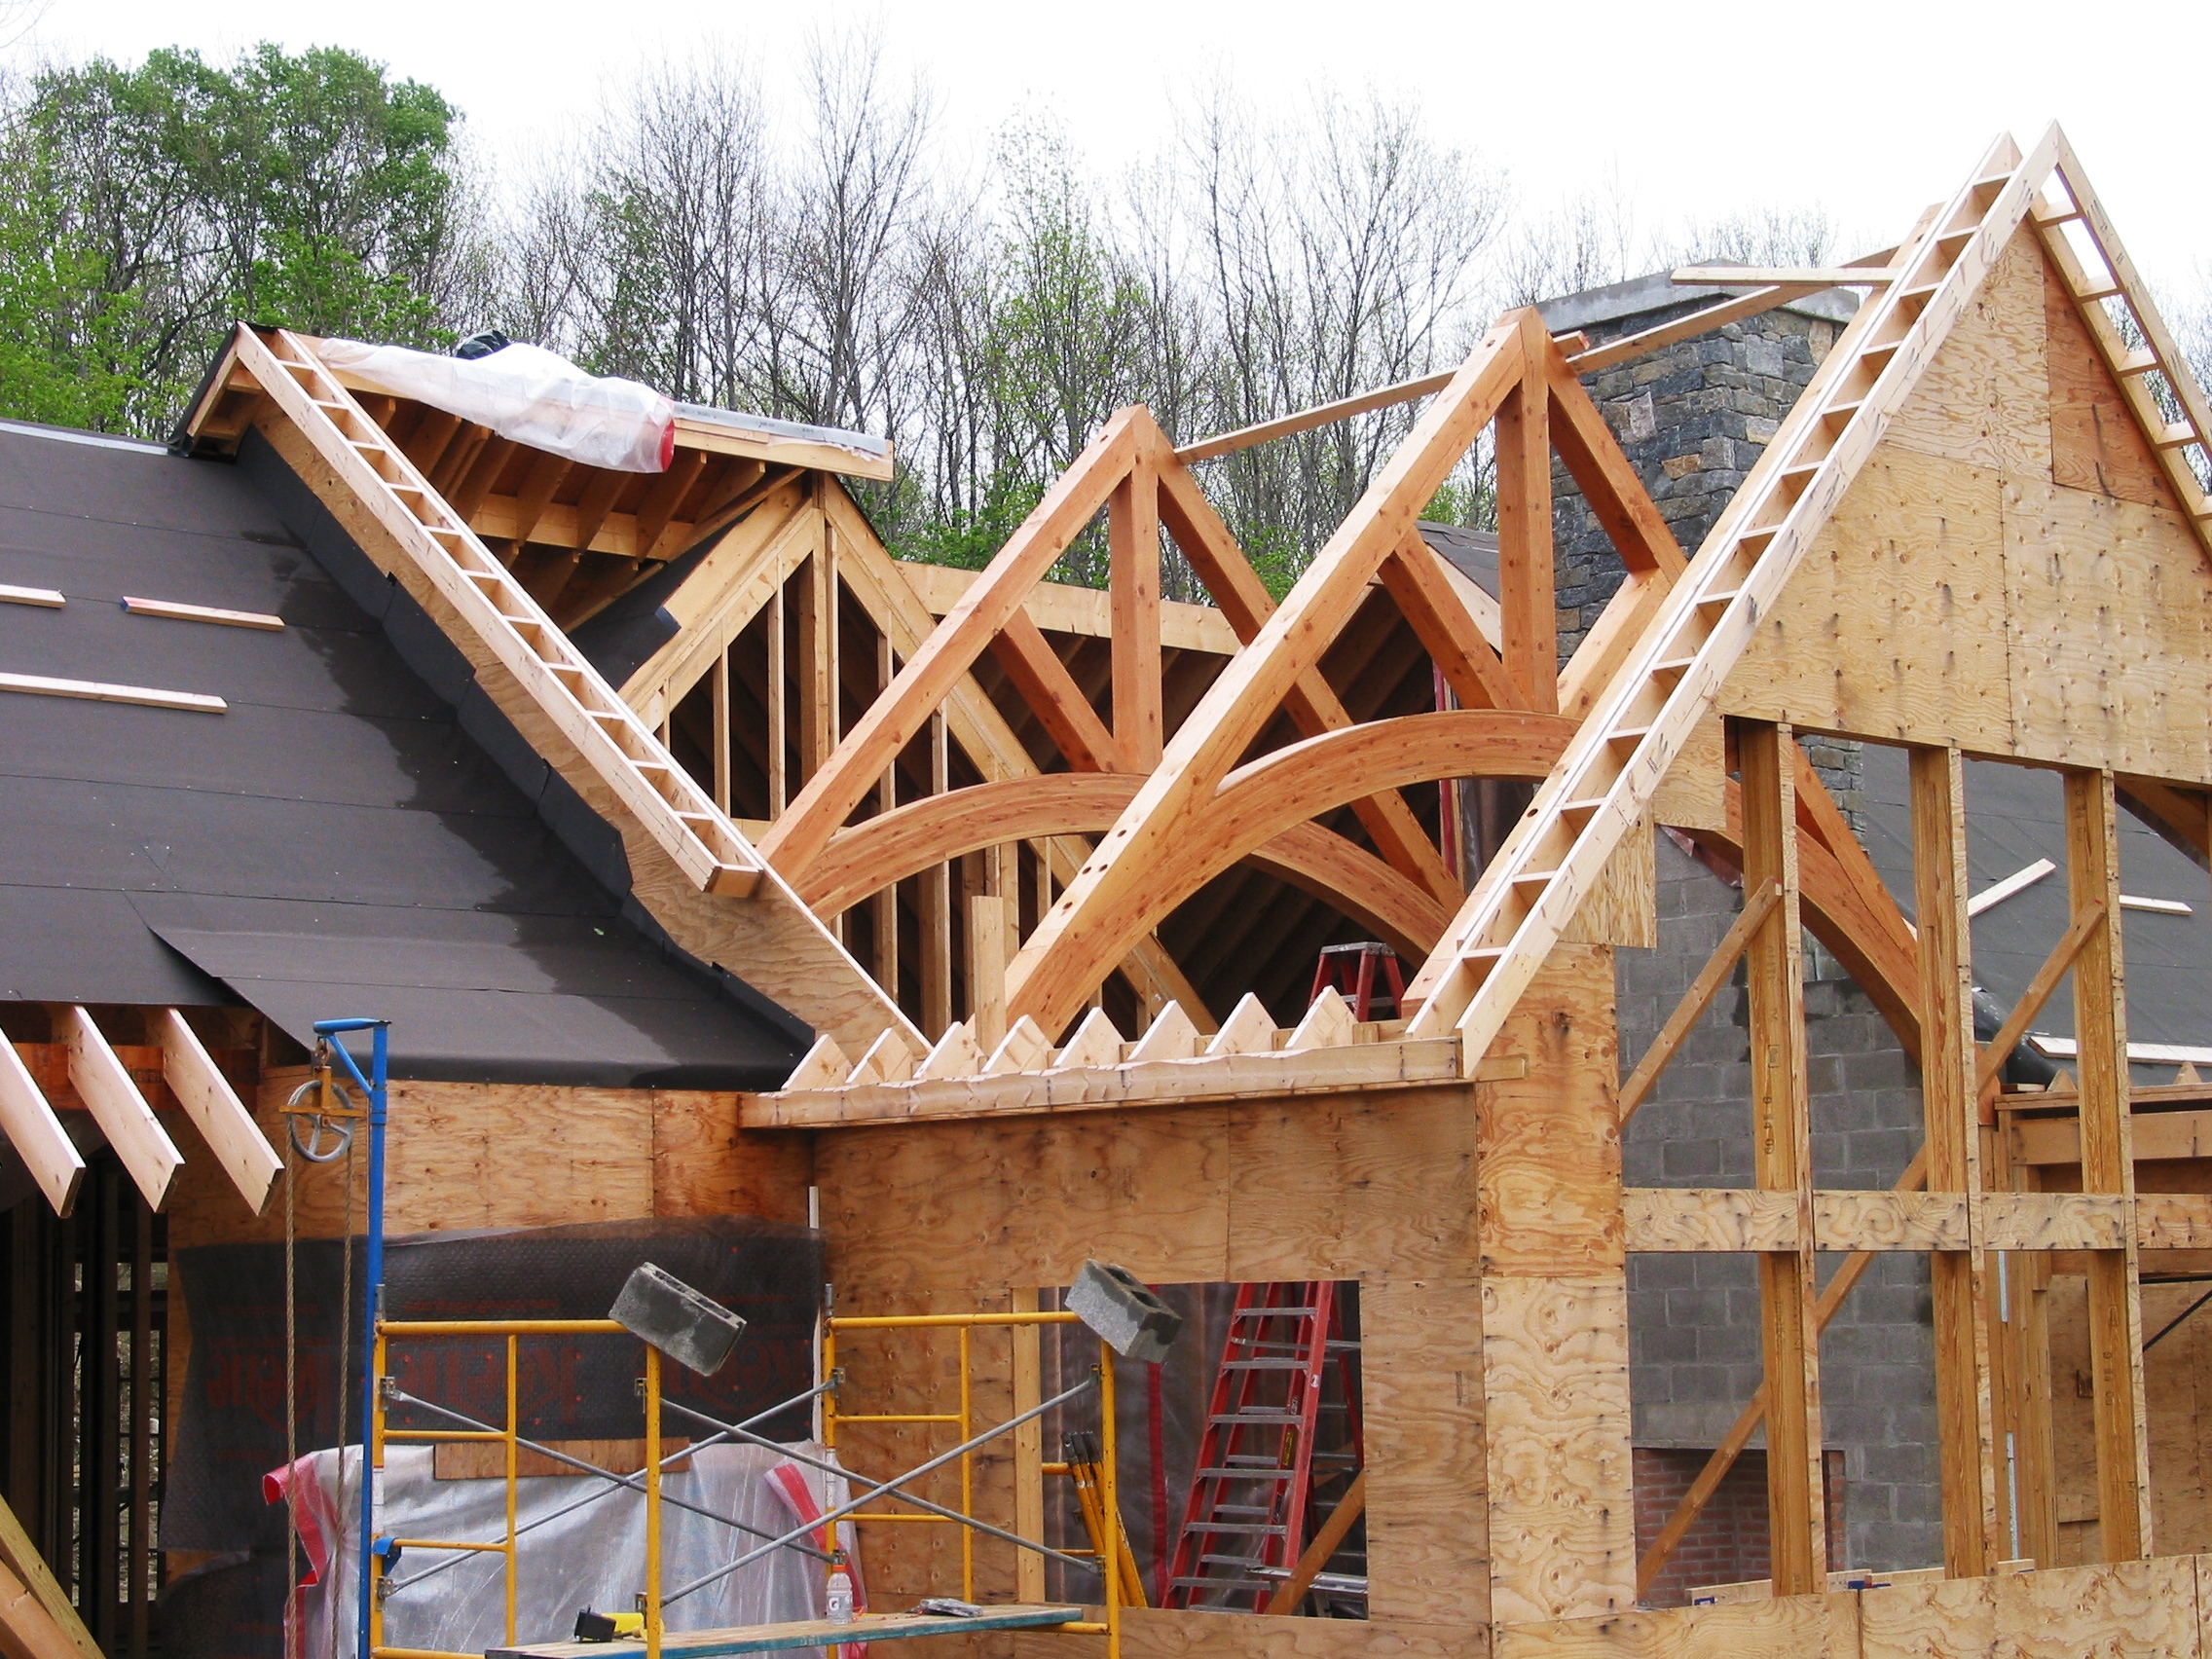 Arches Arches Everwhere Continued  Timber  Frame  Homes  More